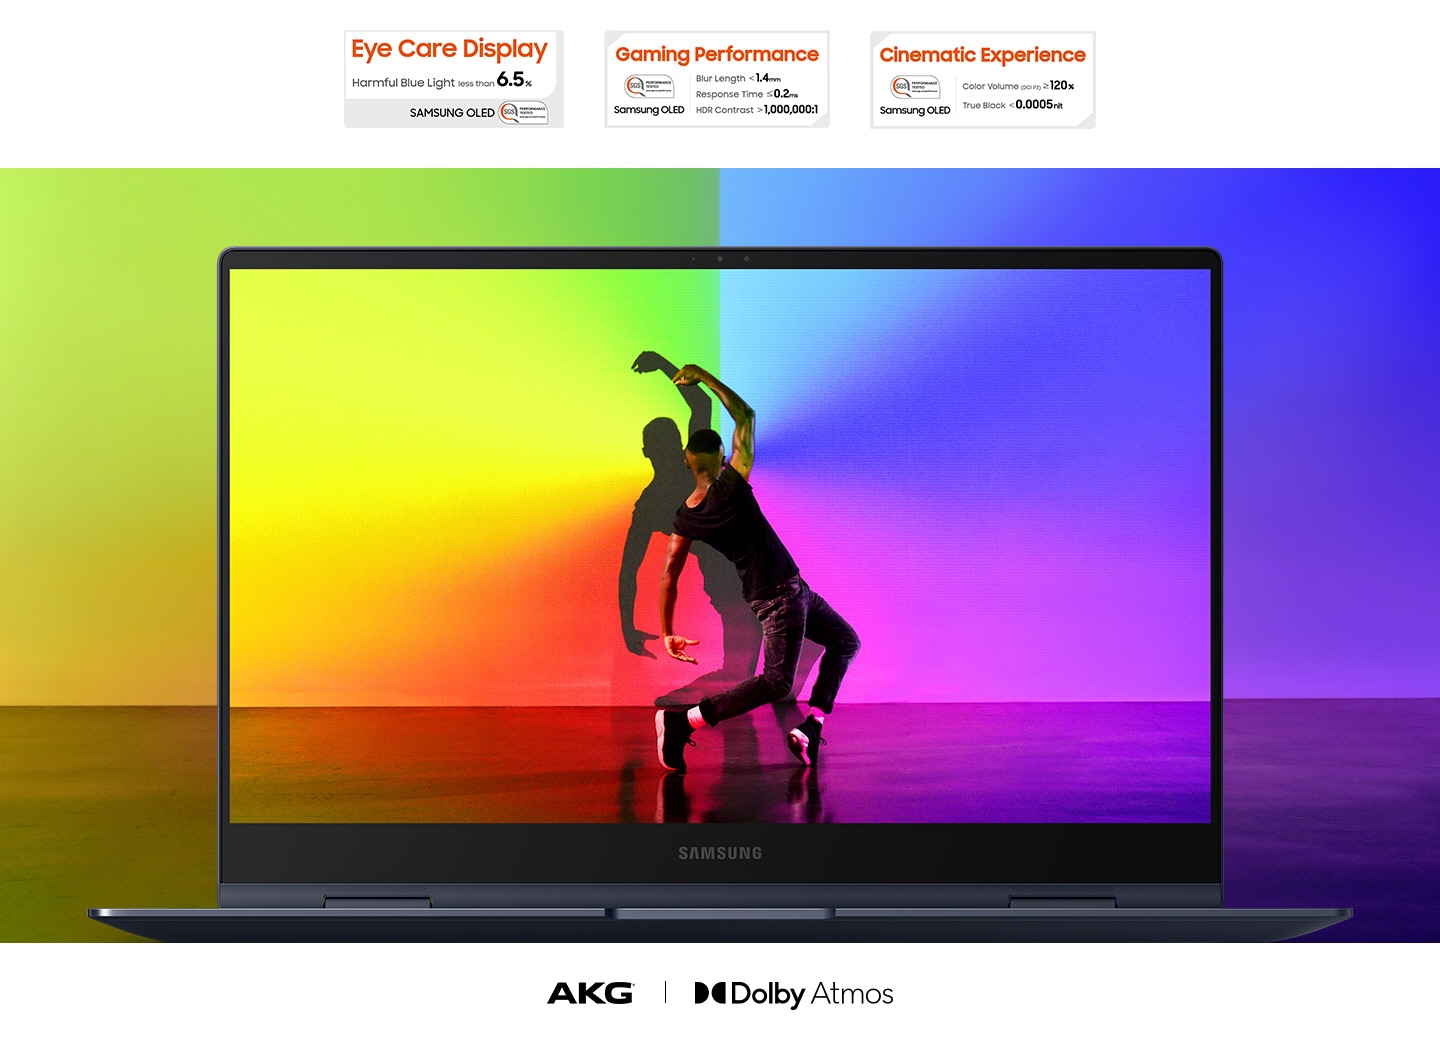 A man showing dance moves in the center of display. Vivid rainbow colors fully occupied both on the inside and outside of display. There are 3 certification badges, each one indicating Eye Care Display, Gaming performance and Cinematic Experience. At the bottom, 'AKG' and 'Dolby Atmos' written, representing the sound system for Galaxy Book Pro 360.